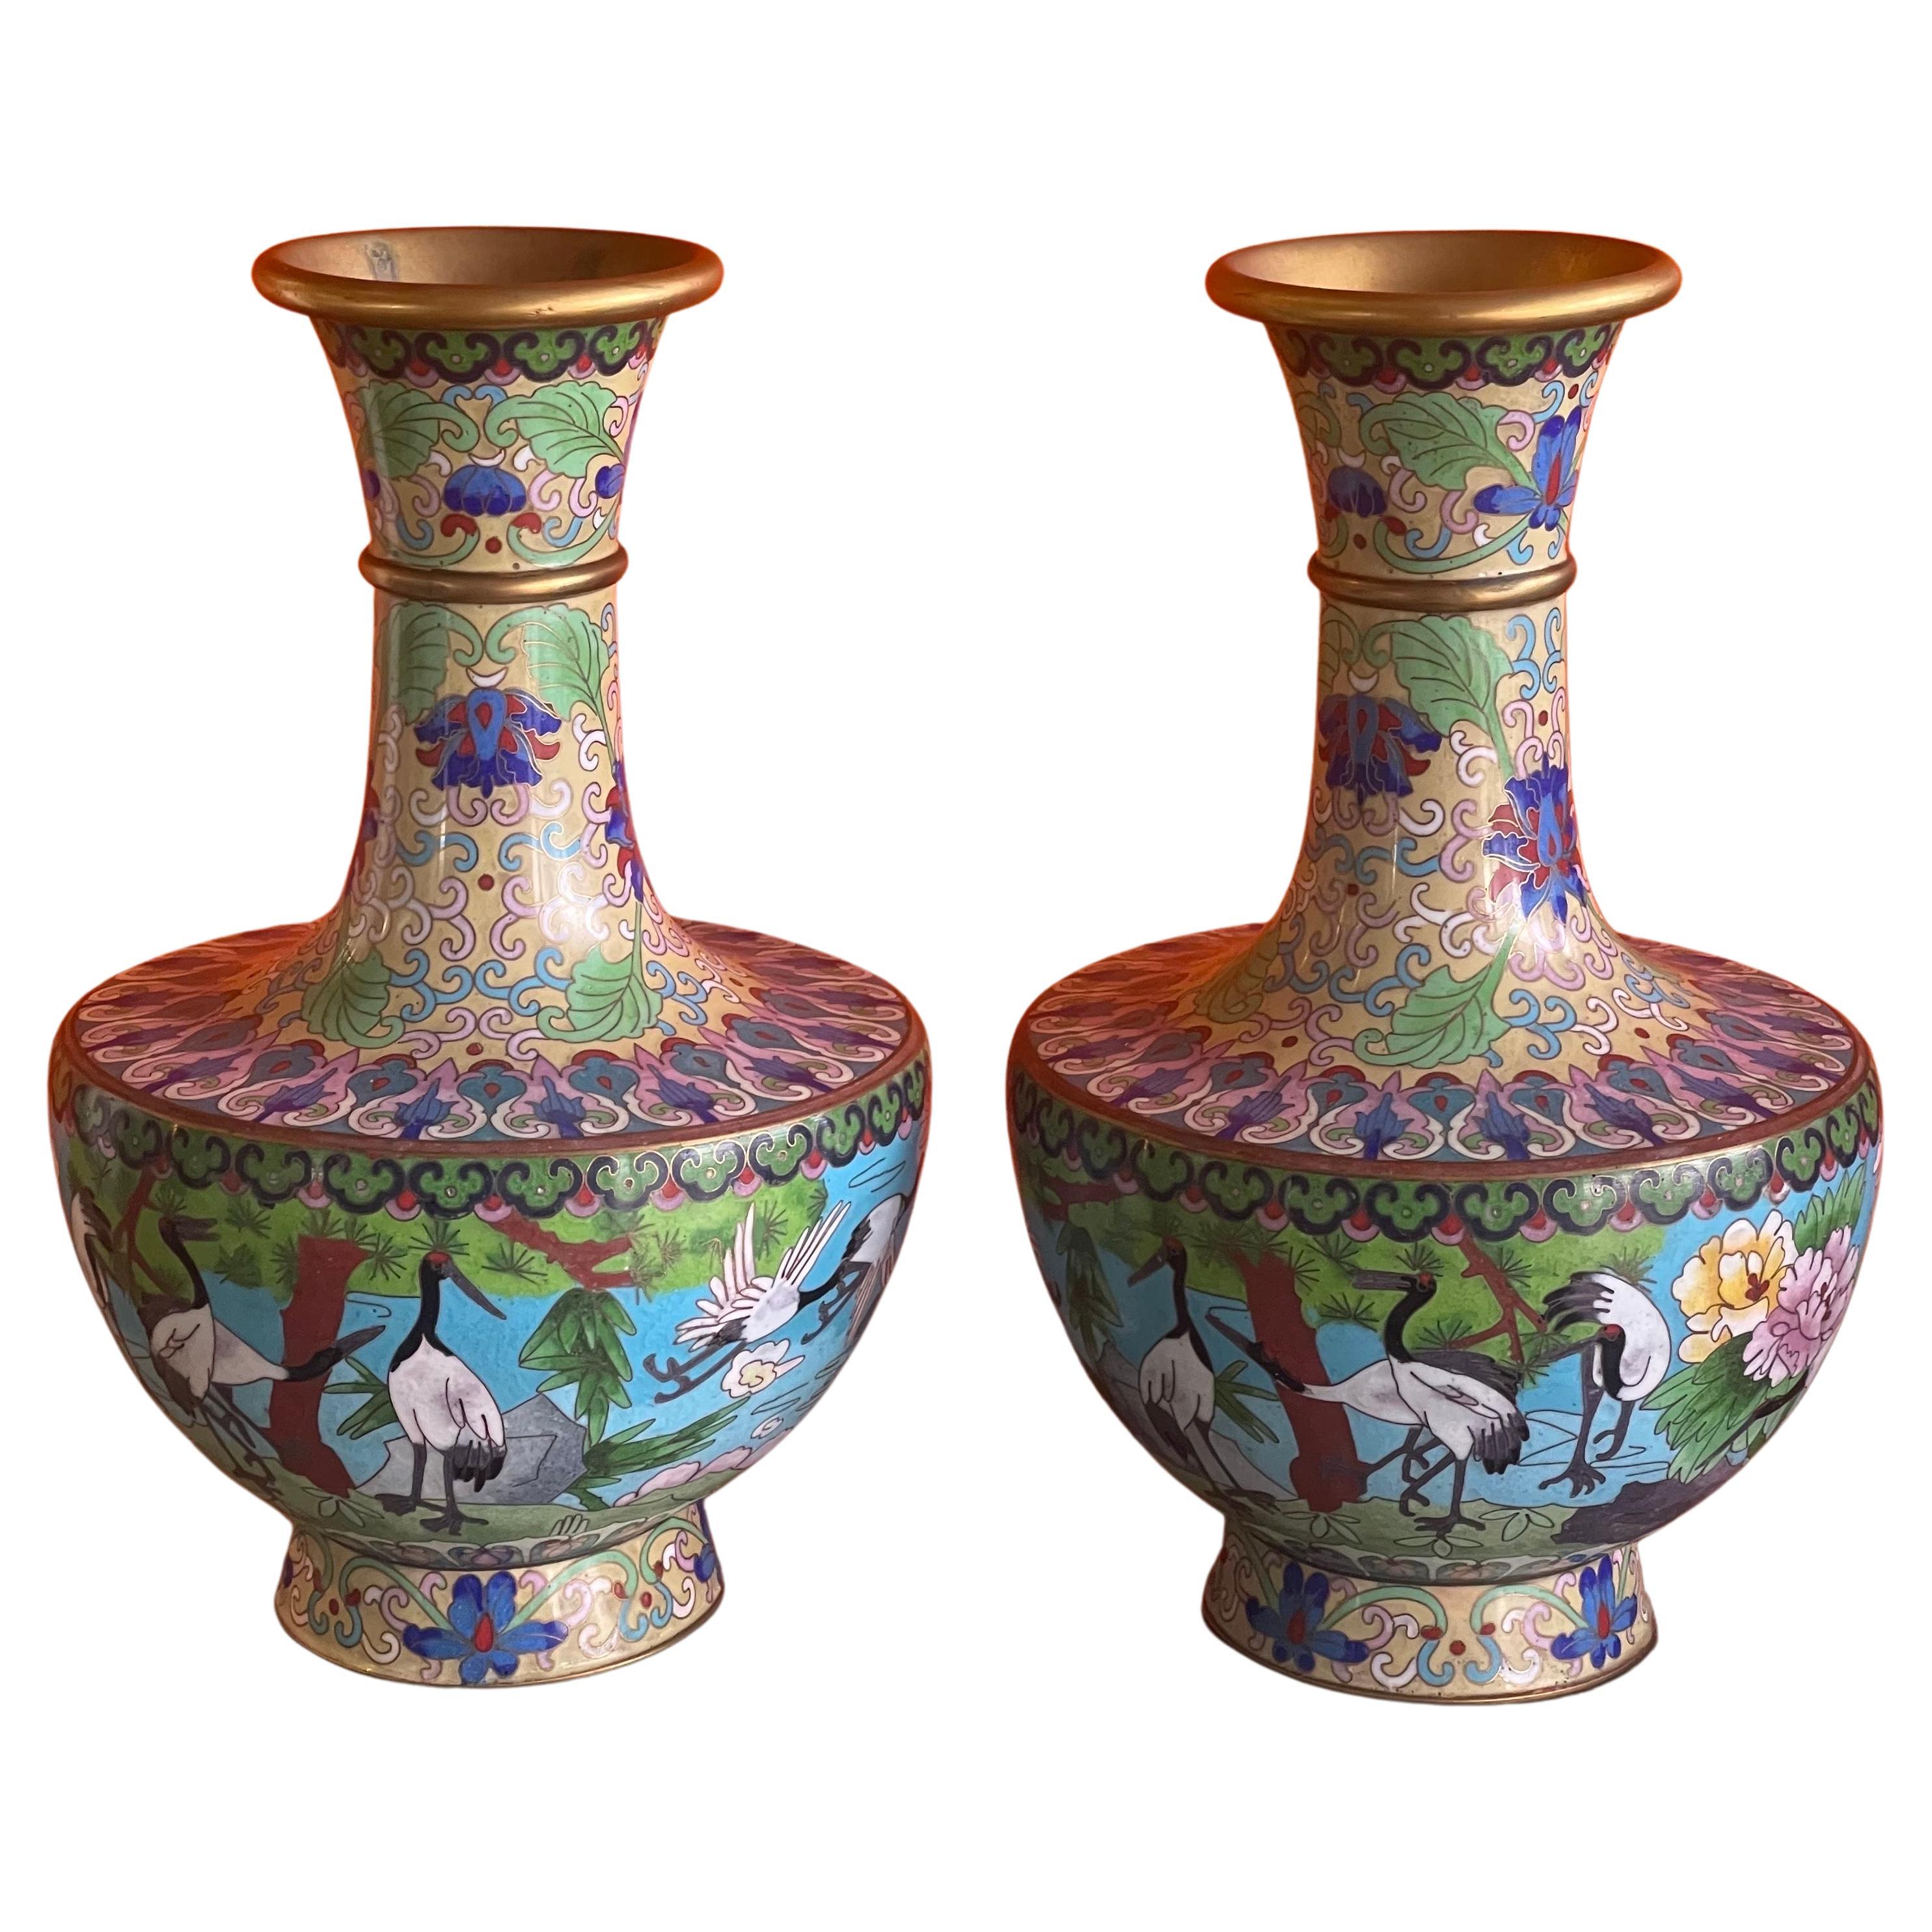 Mirrored Pair of Chinese Cloisonne Vases with Crane Motif